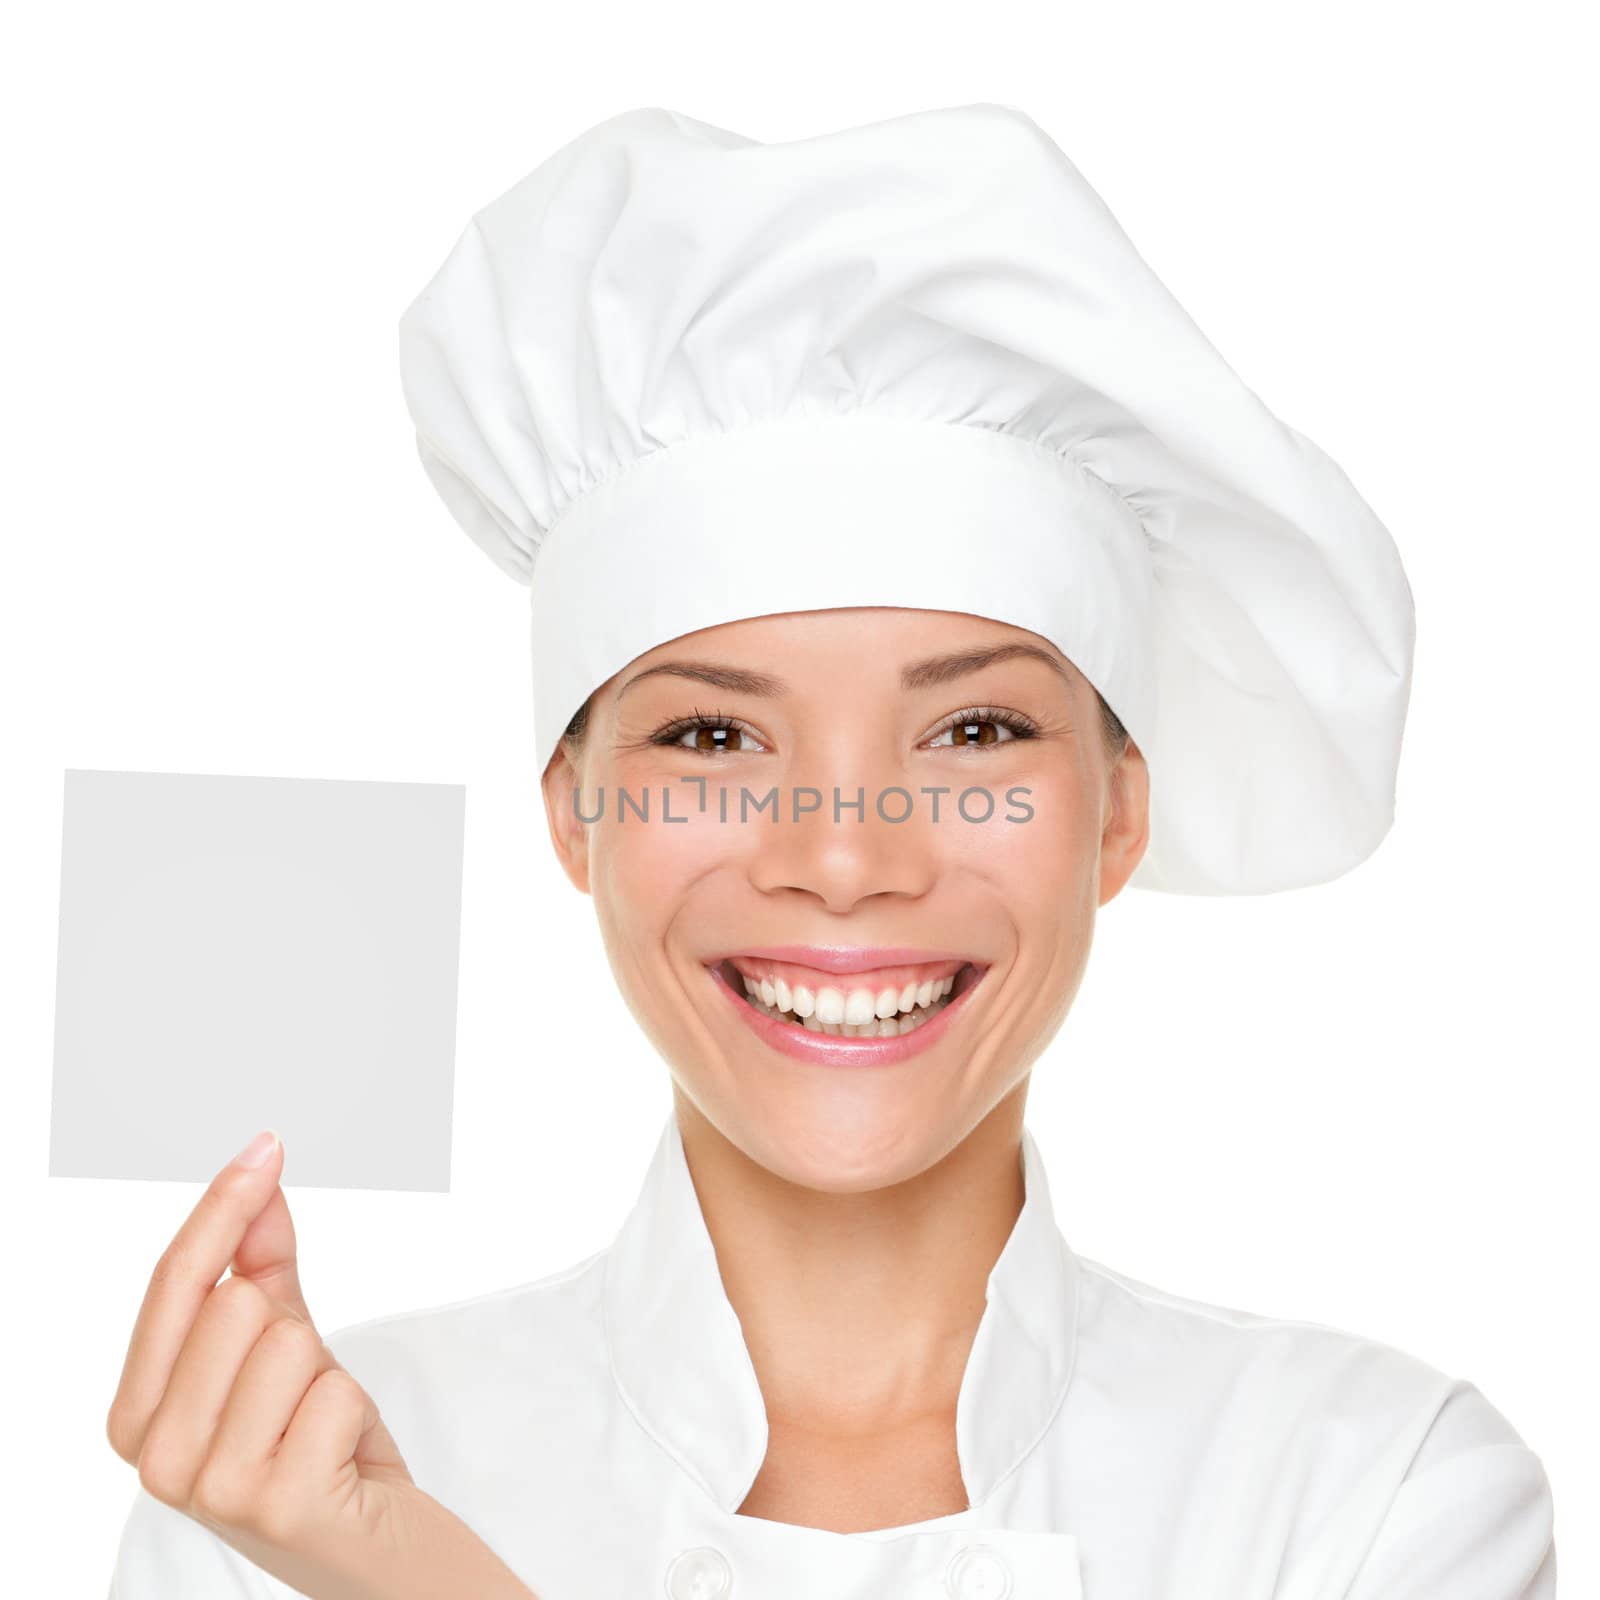 Chef, baker or cook woman showing blank sign card wearing chefs uniform and hat. Blank card for menu, gift card, offer etc. Beautiful young multicultural Asian / Caucasian female woman isolated on white background.